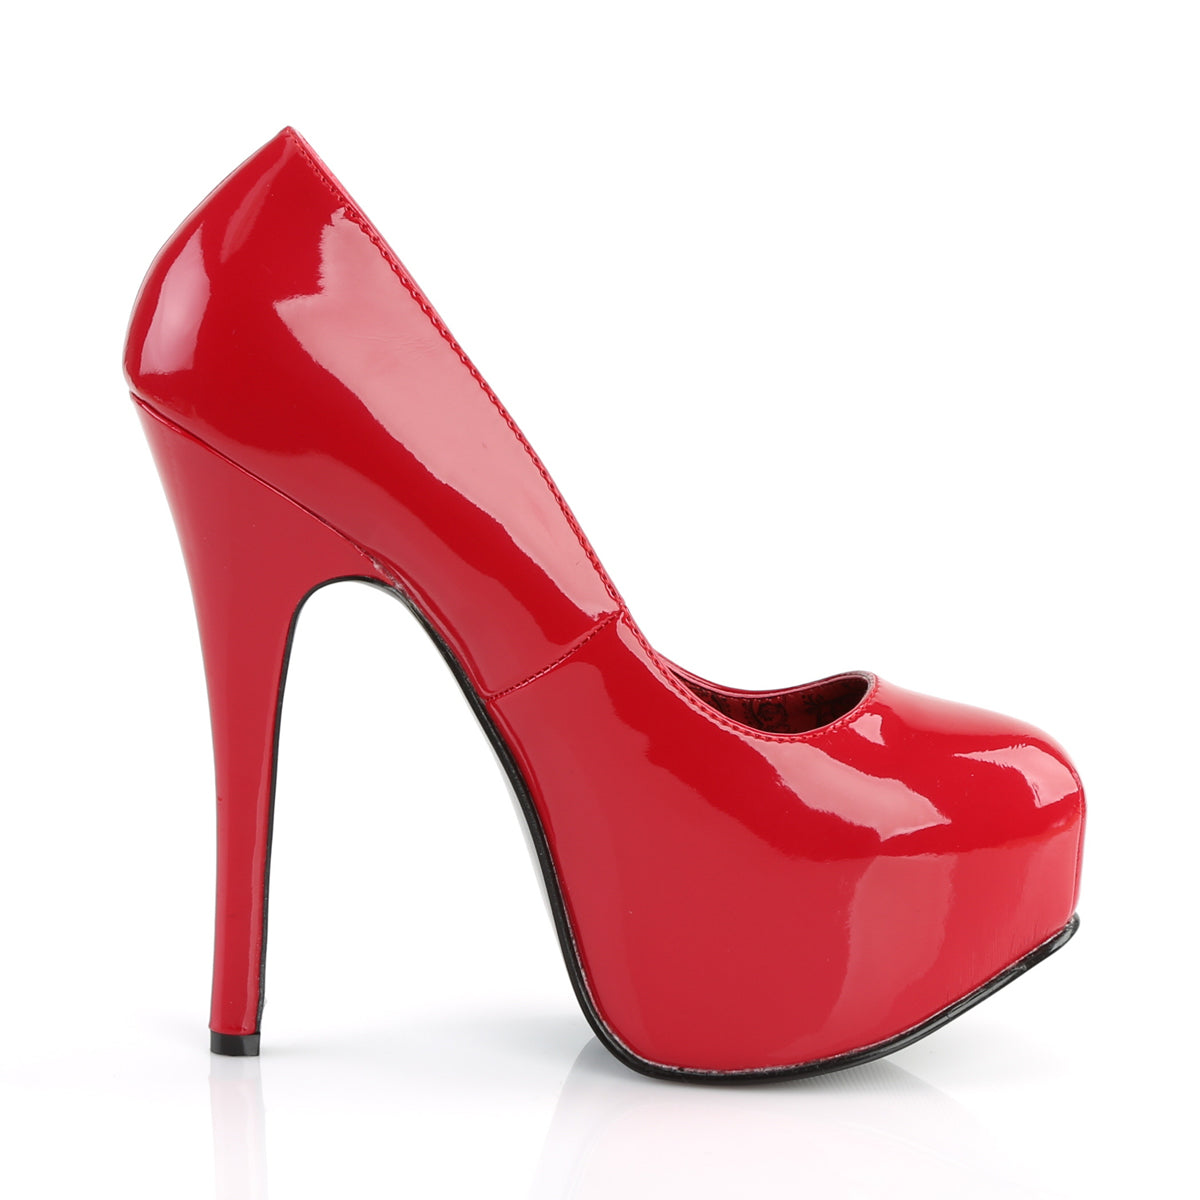 TEEZE-06 Bordello Heels Red Patent Shoes [Moulin Rouge Shoes]